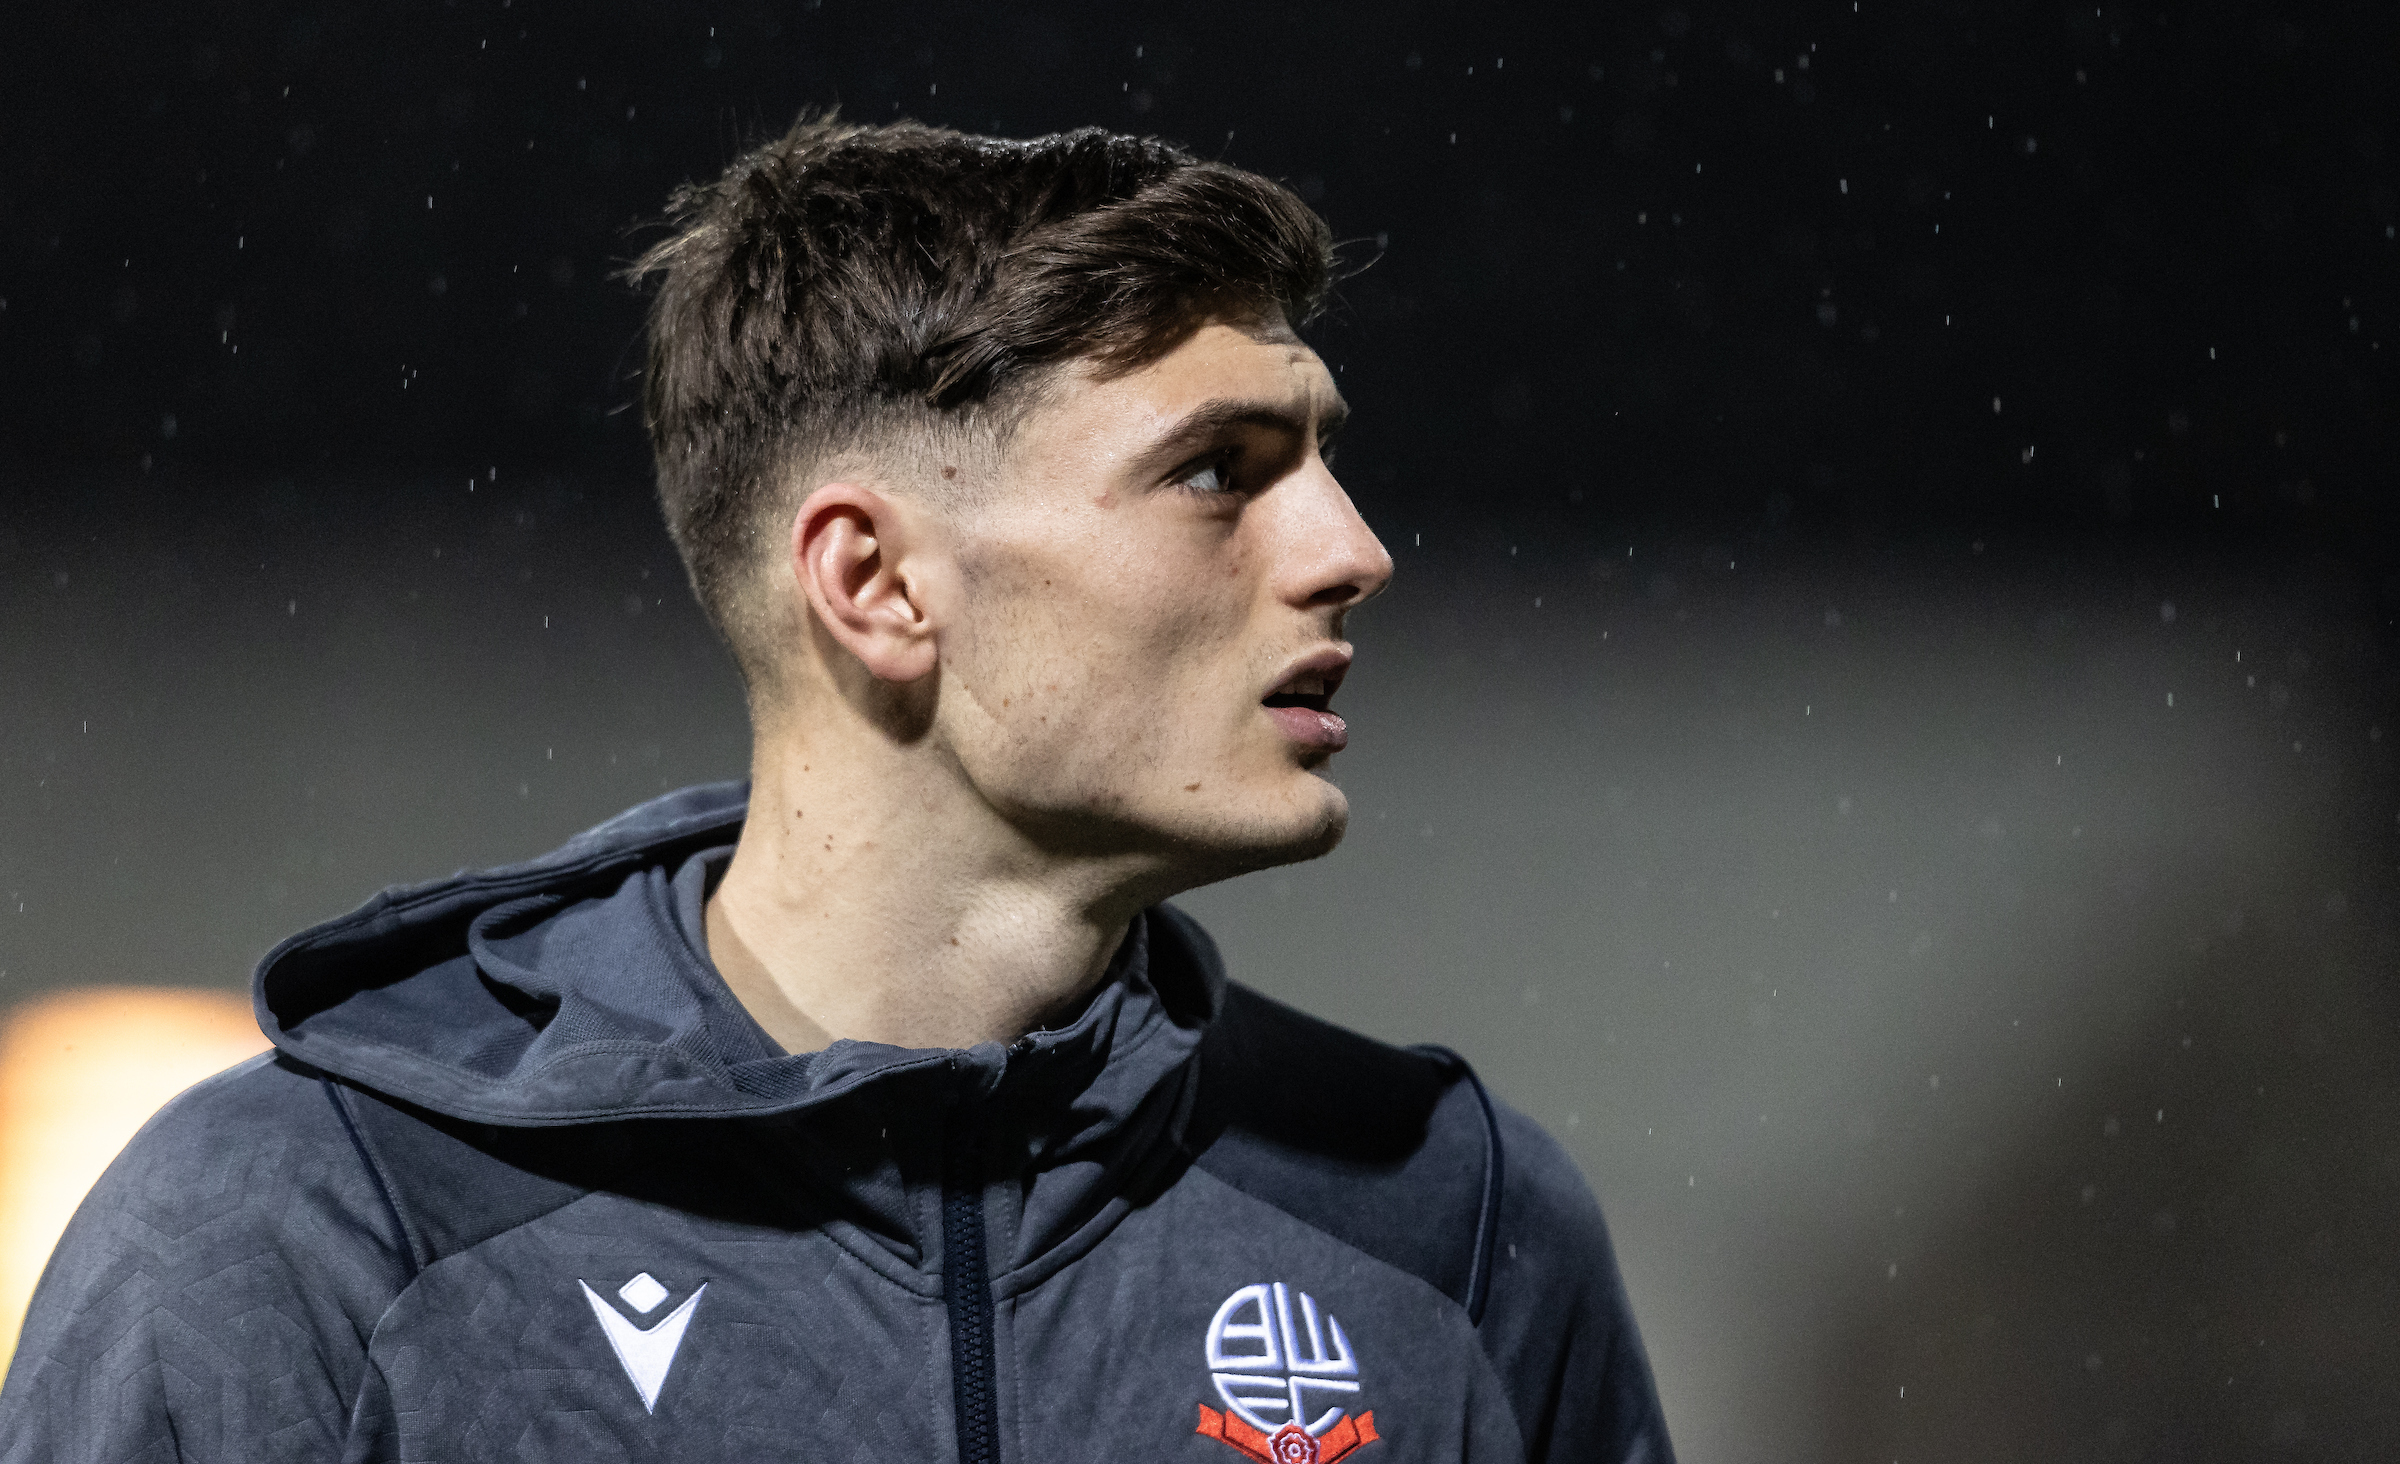 Caleb Taylor on Bolton Wanderers loan move from West Brom